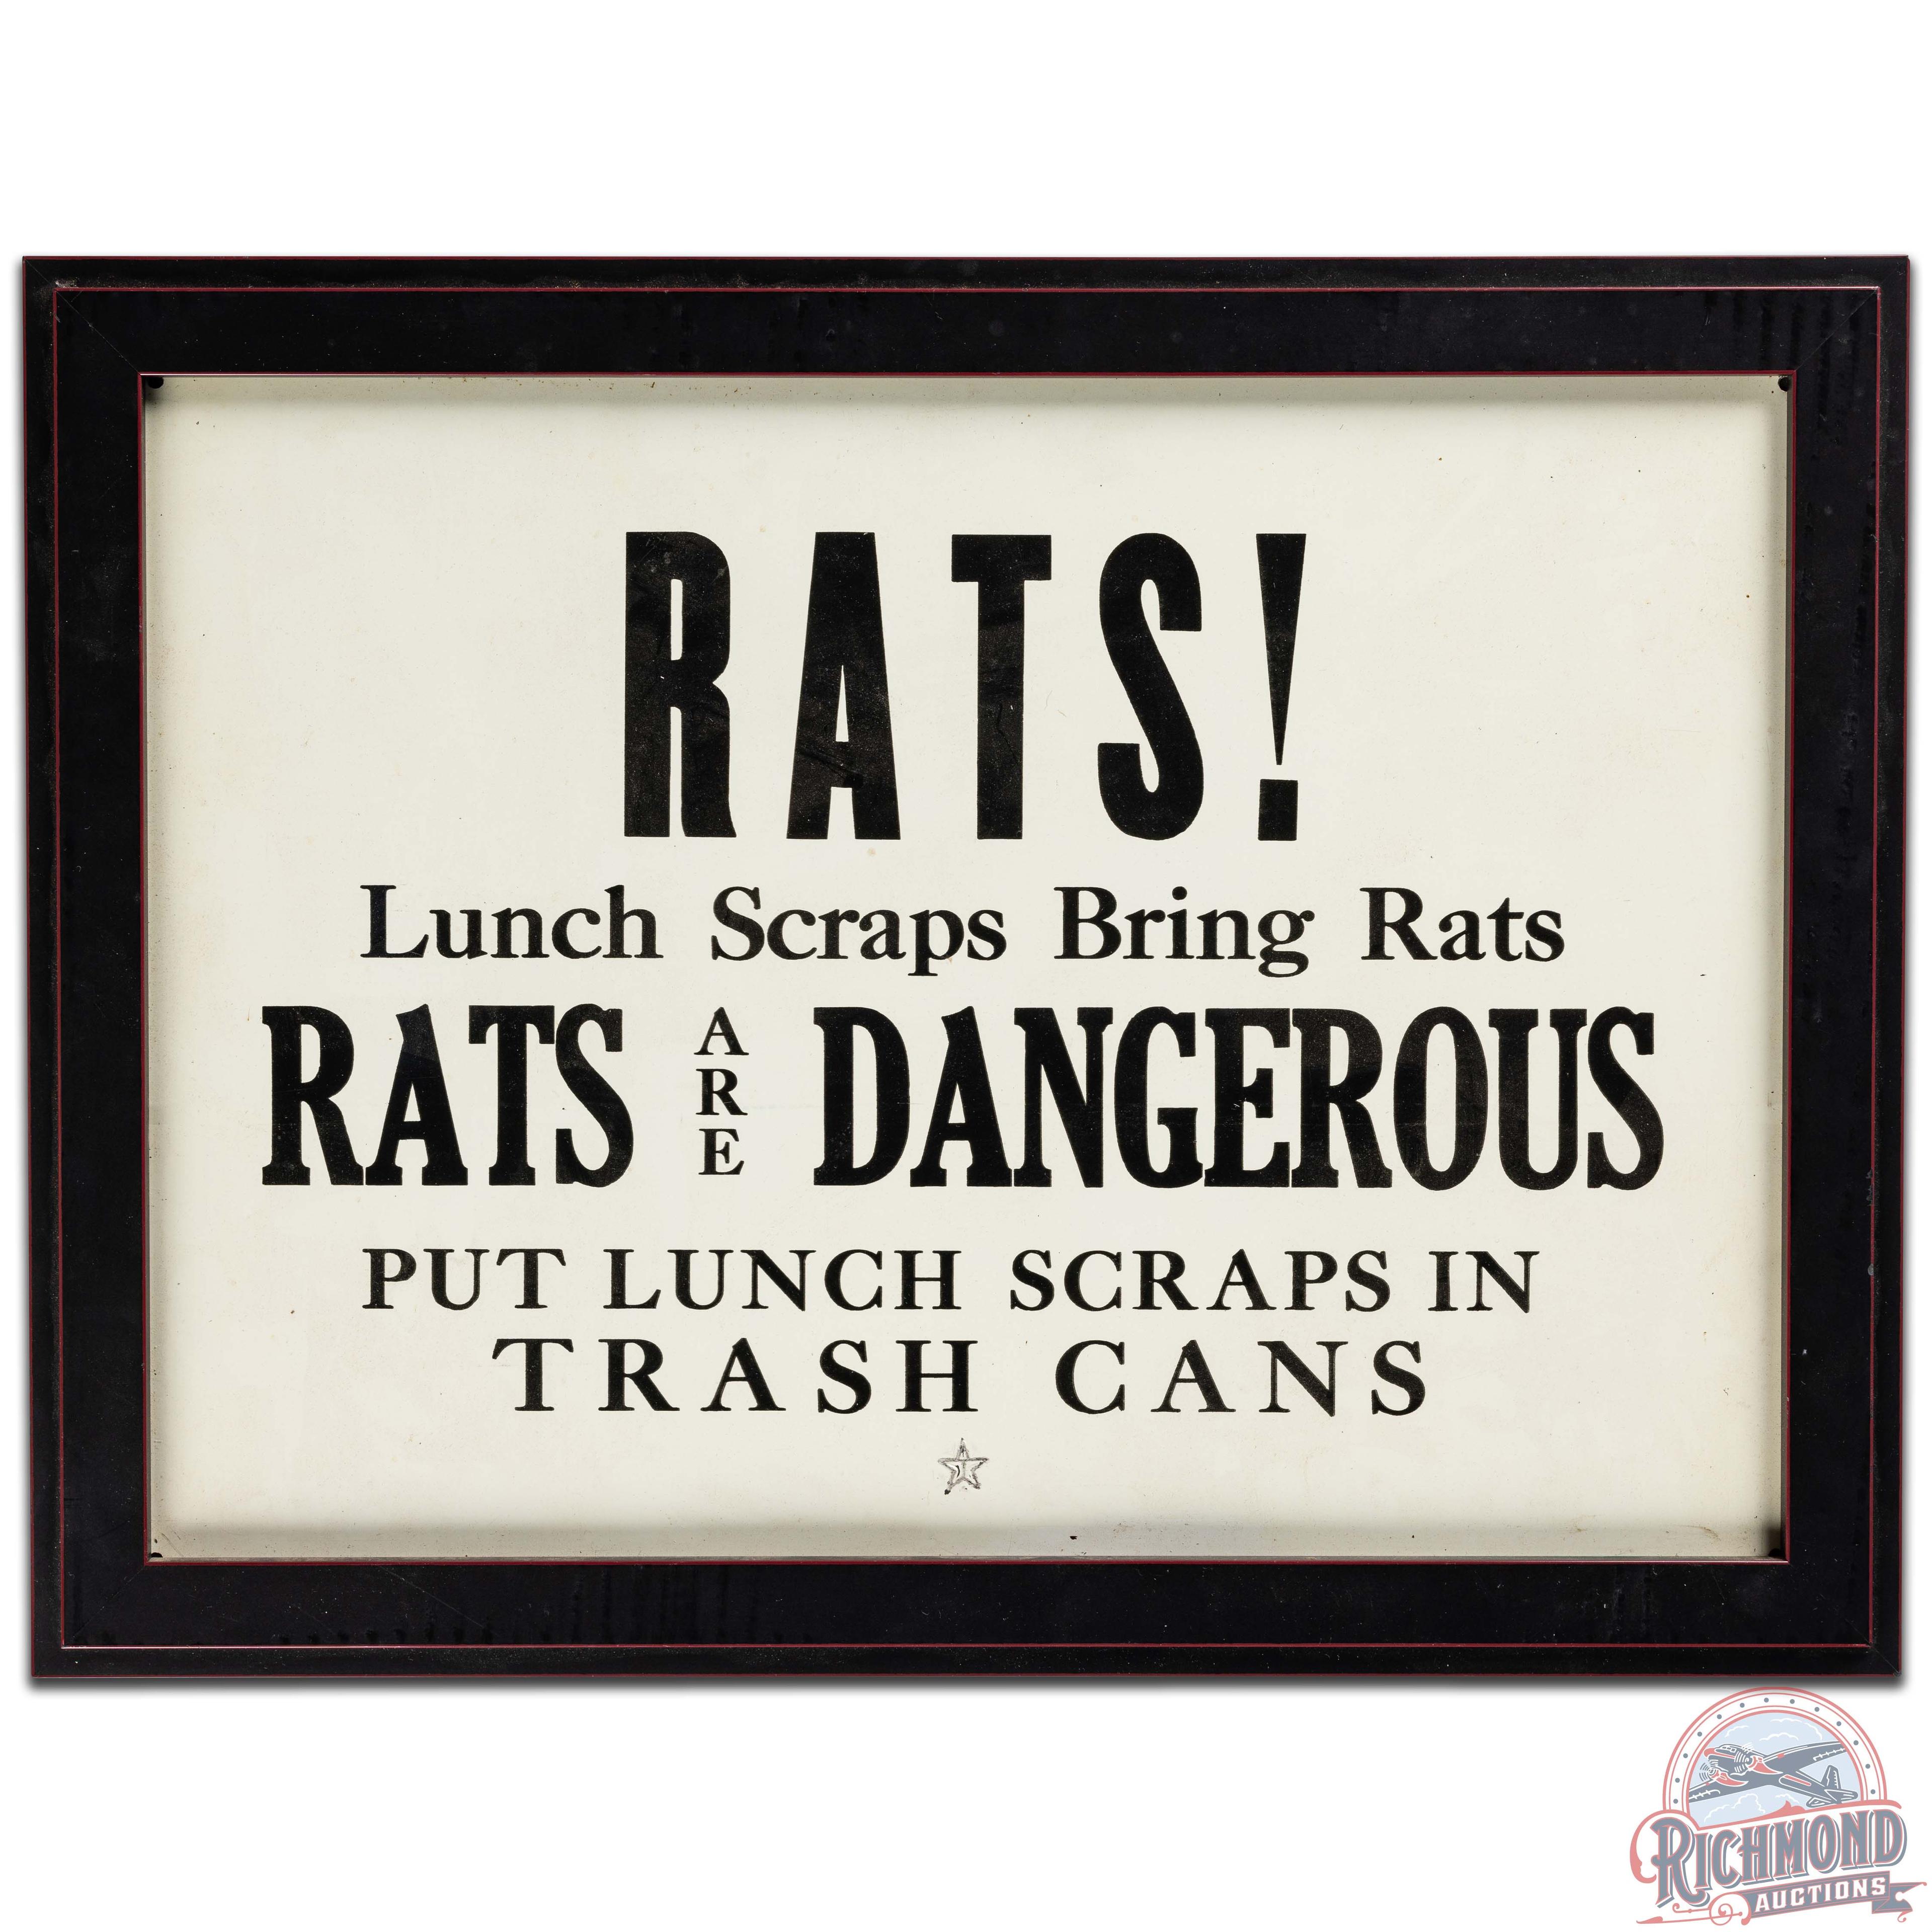 Texaco Rats! Put Lunch Scraps in Trash Cans Port Arthur TX Refinery SS Tin Sign